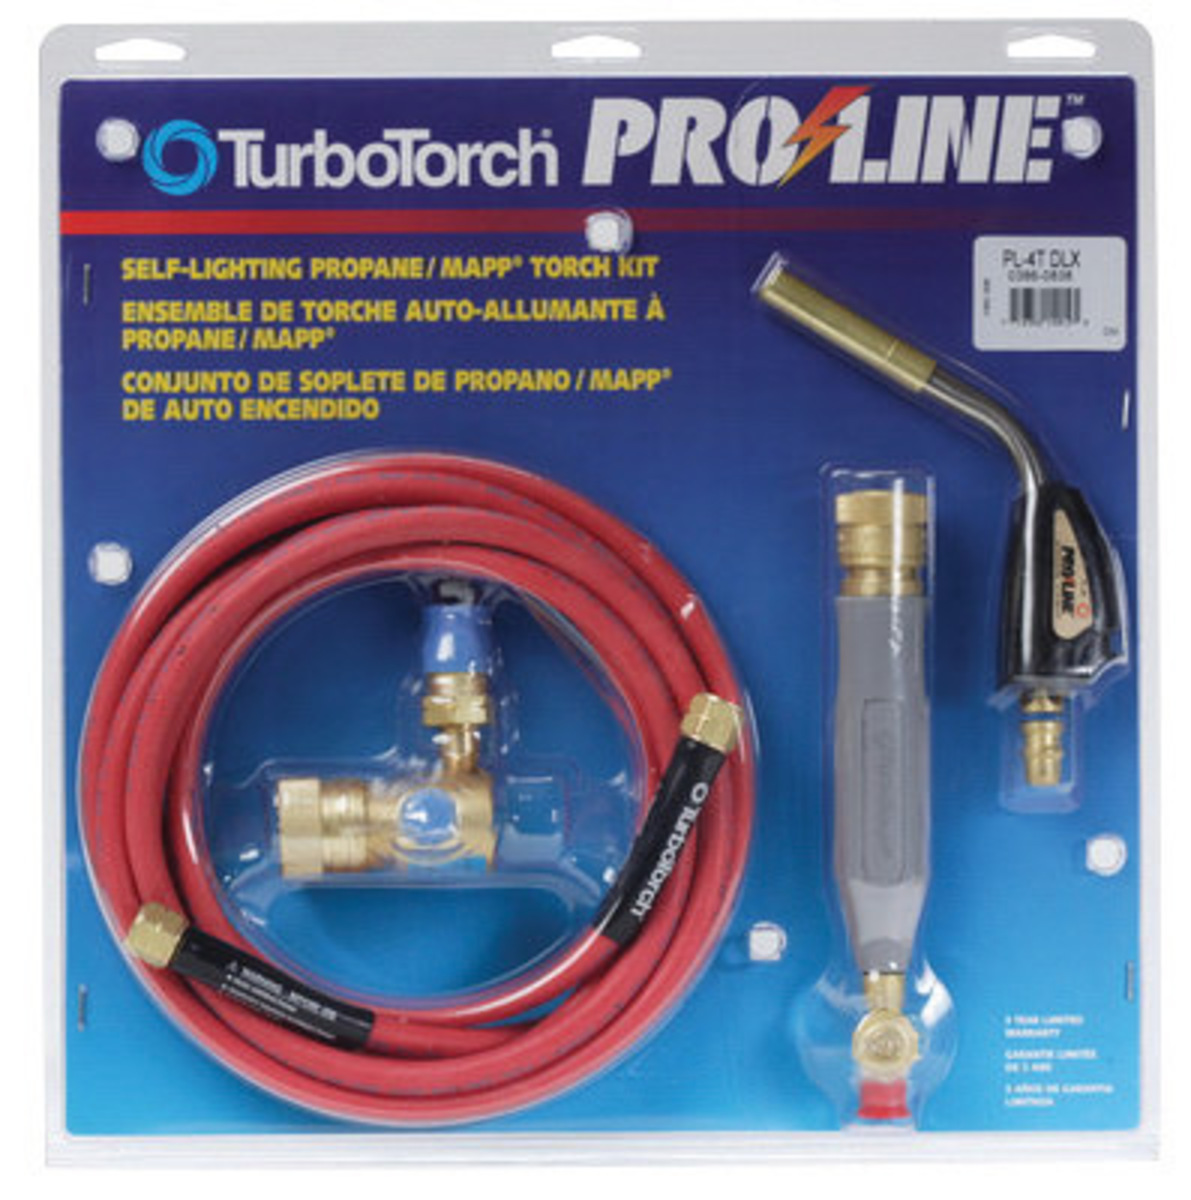 pl-12a dlx b kit TurboTorch Pro-Line Swirl Air Acetylene Kits 15psi acety. 